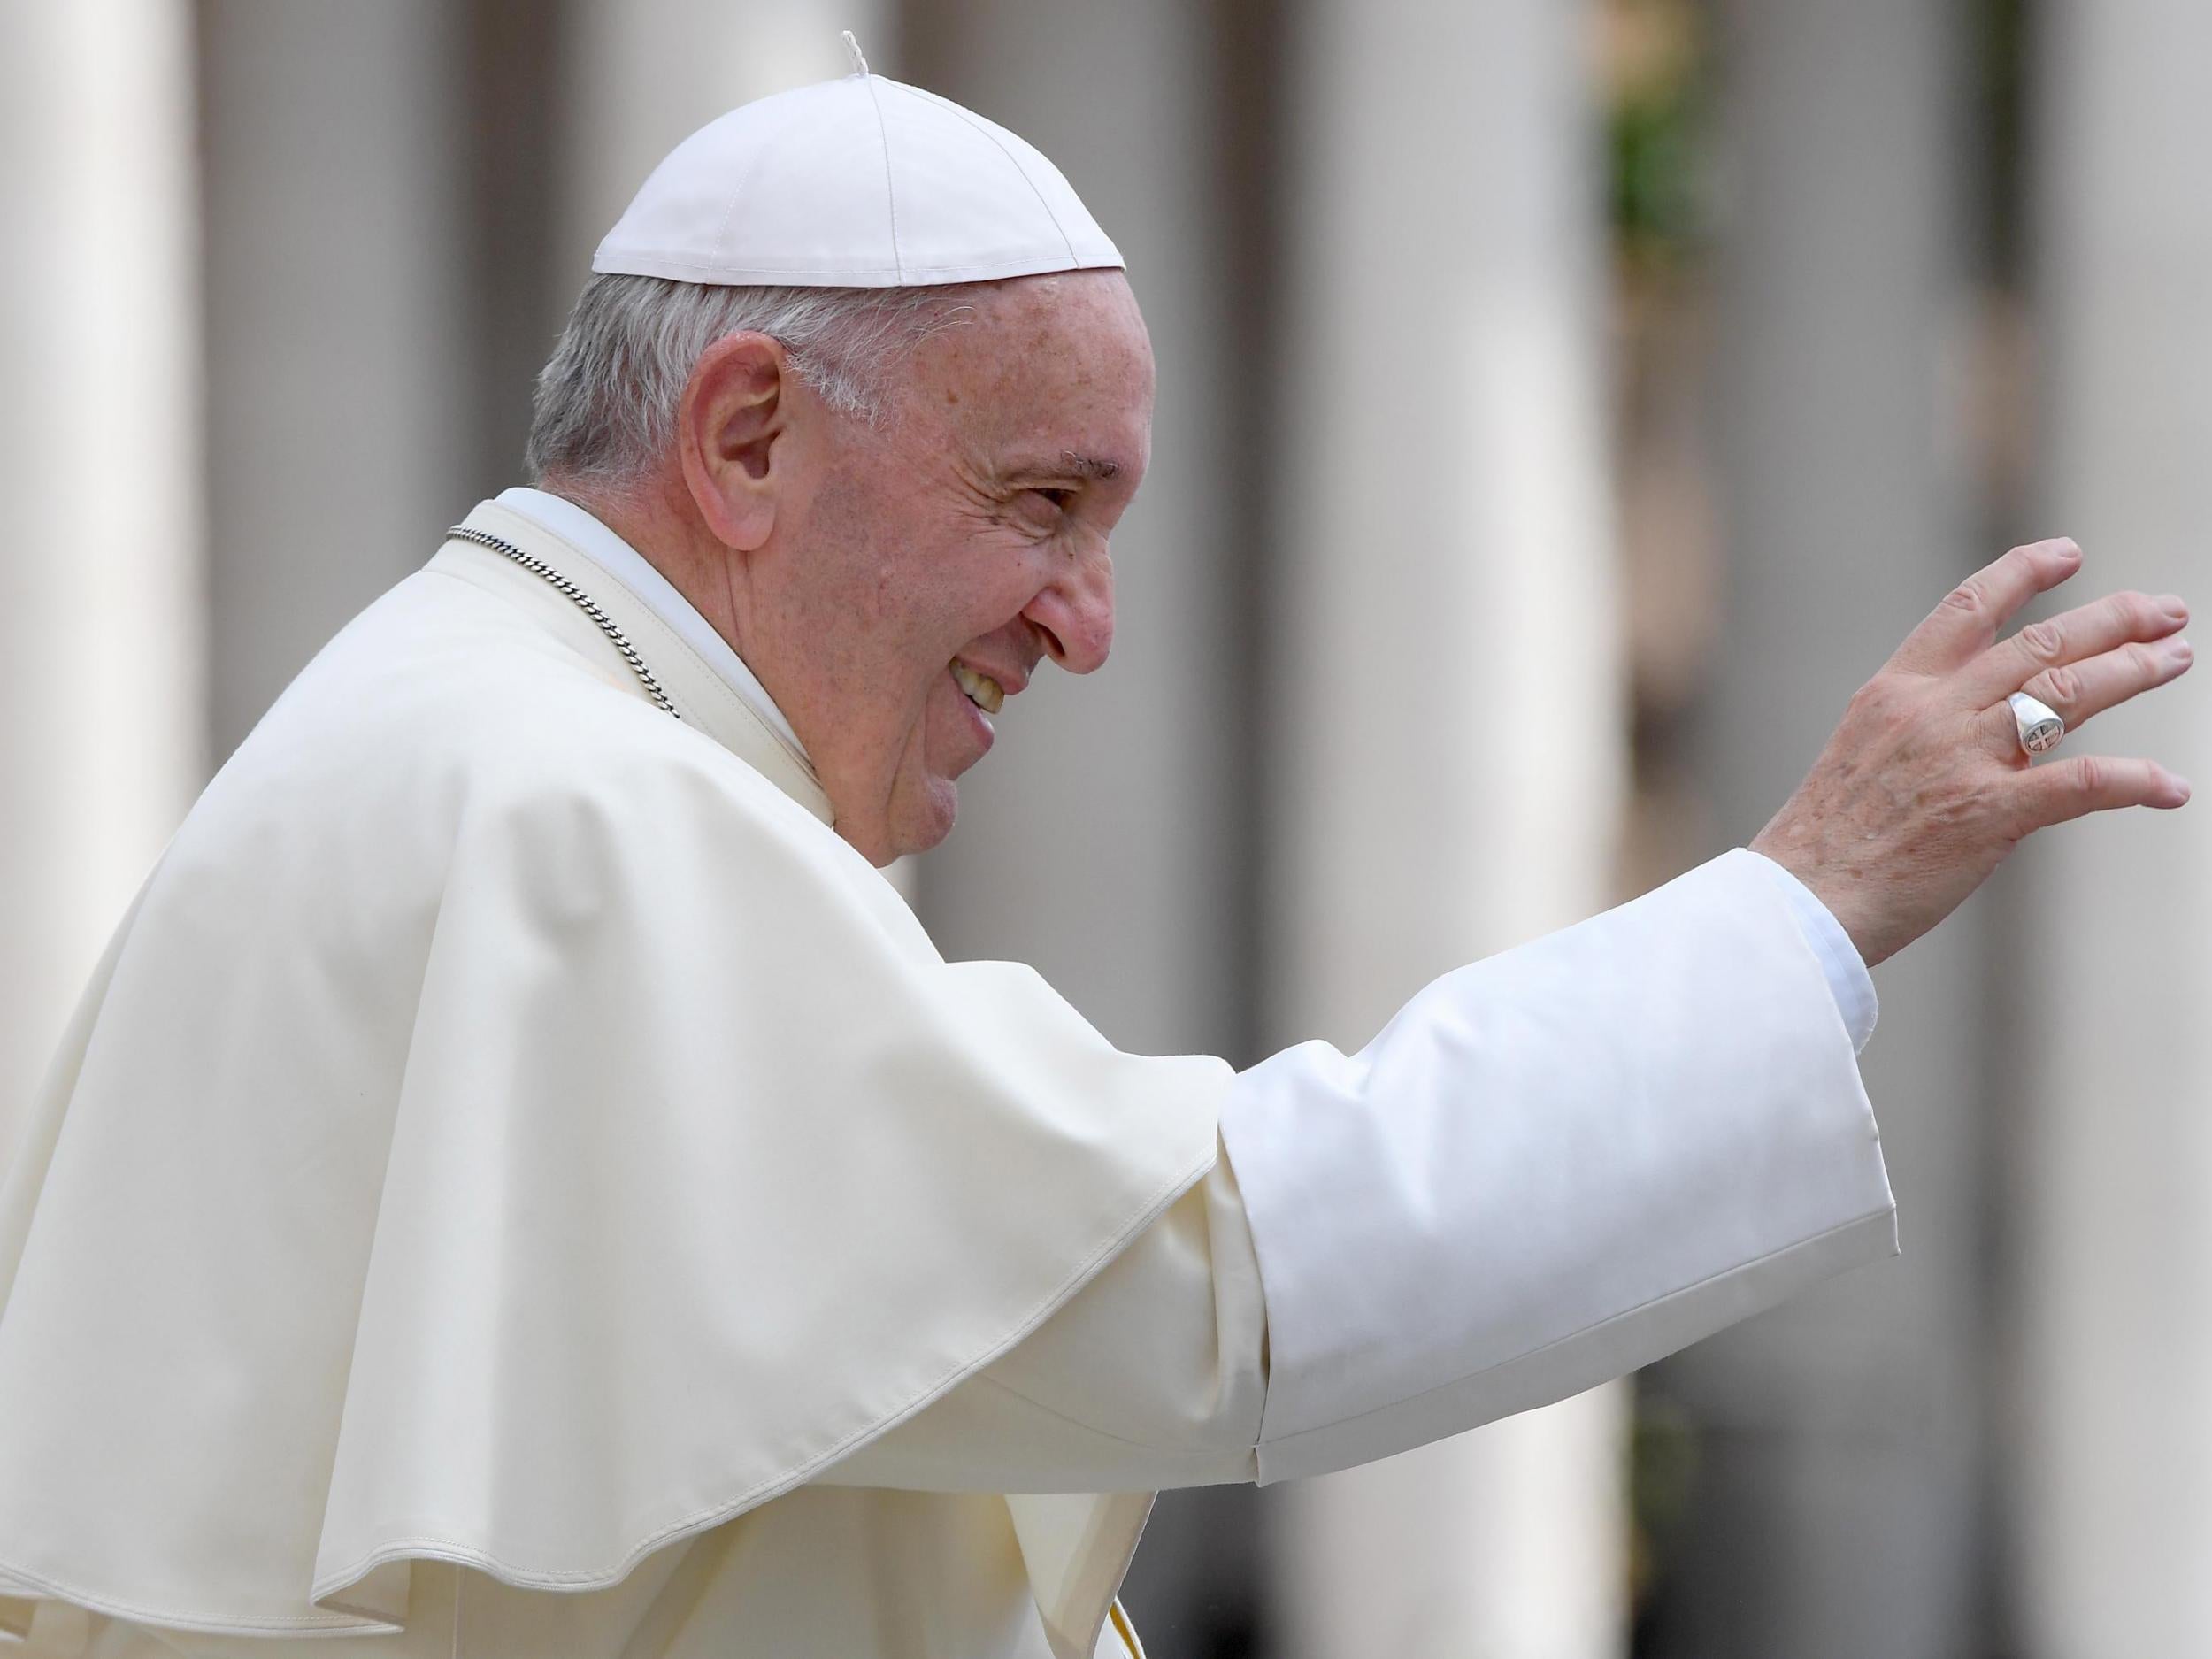 The current supreme pontiff is typically seen as more tolerant of gay relationships than his predecessors, but the catechism remains intolerant